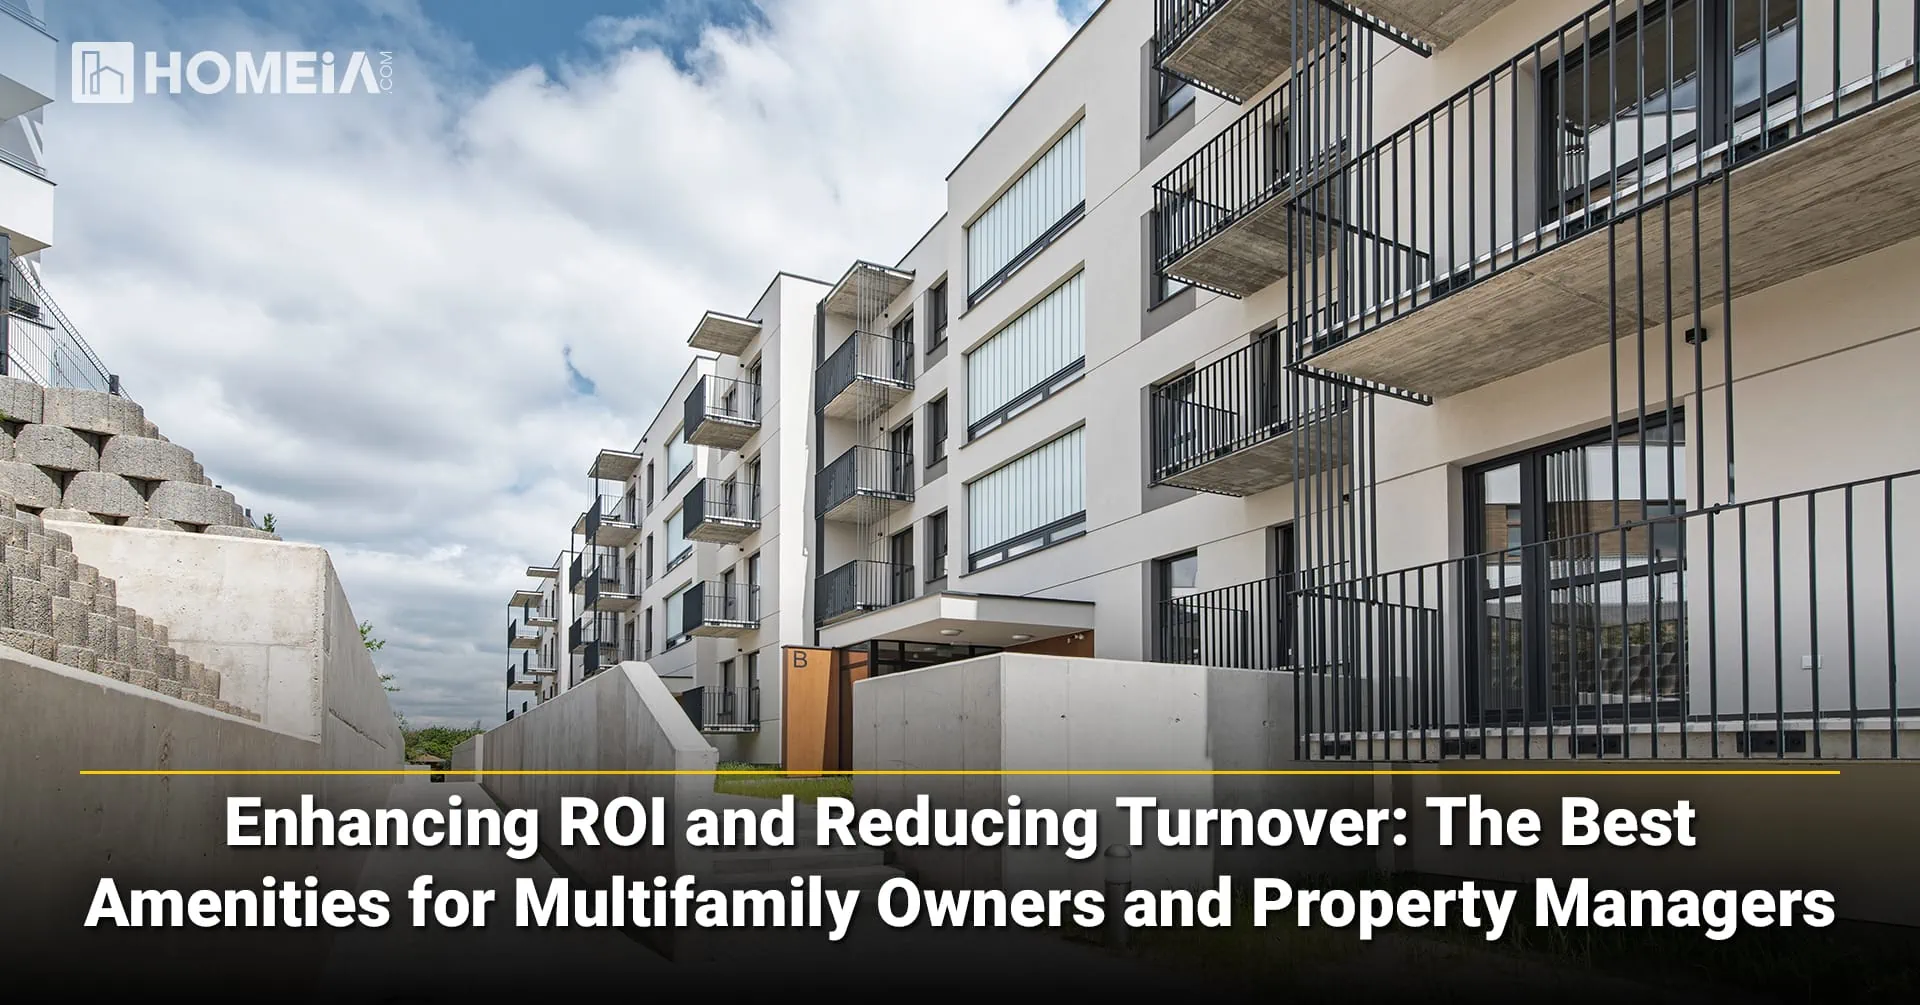 Enhancing ROI and Reducing Turnover: The Best Amenities for Multifamily Owners and Property Managers